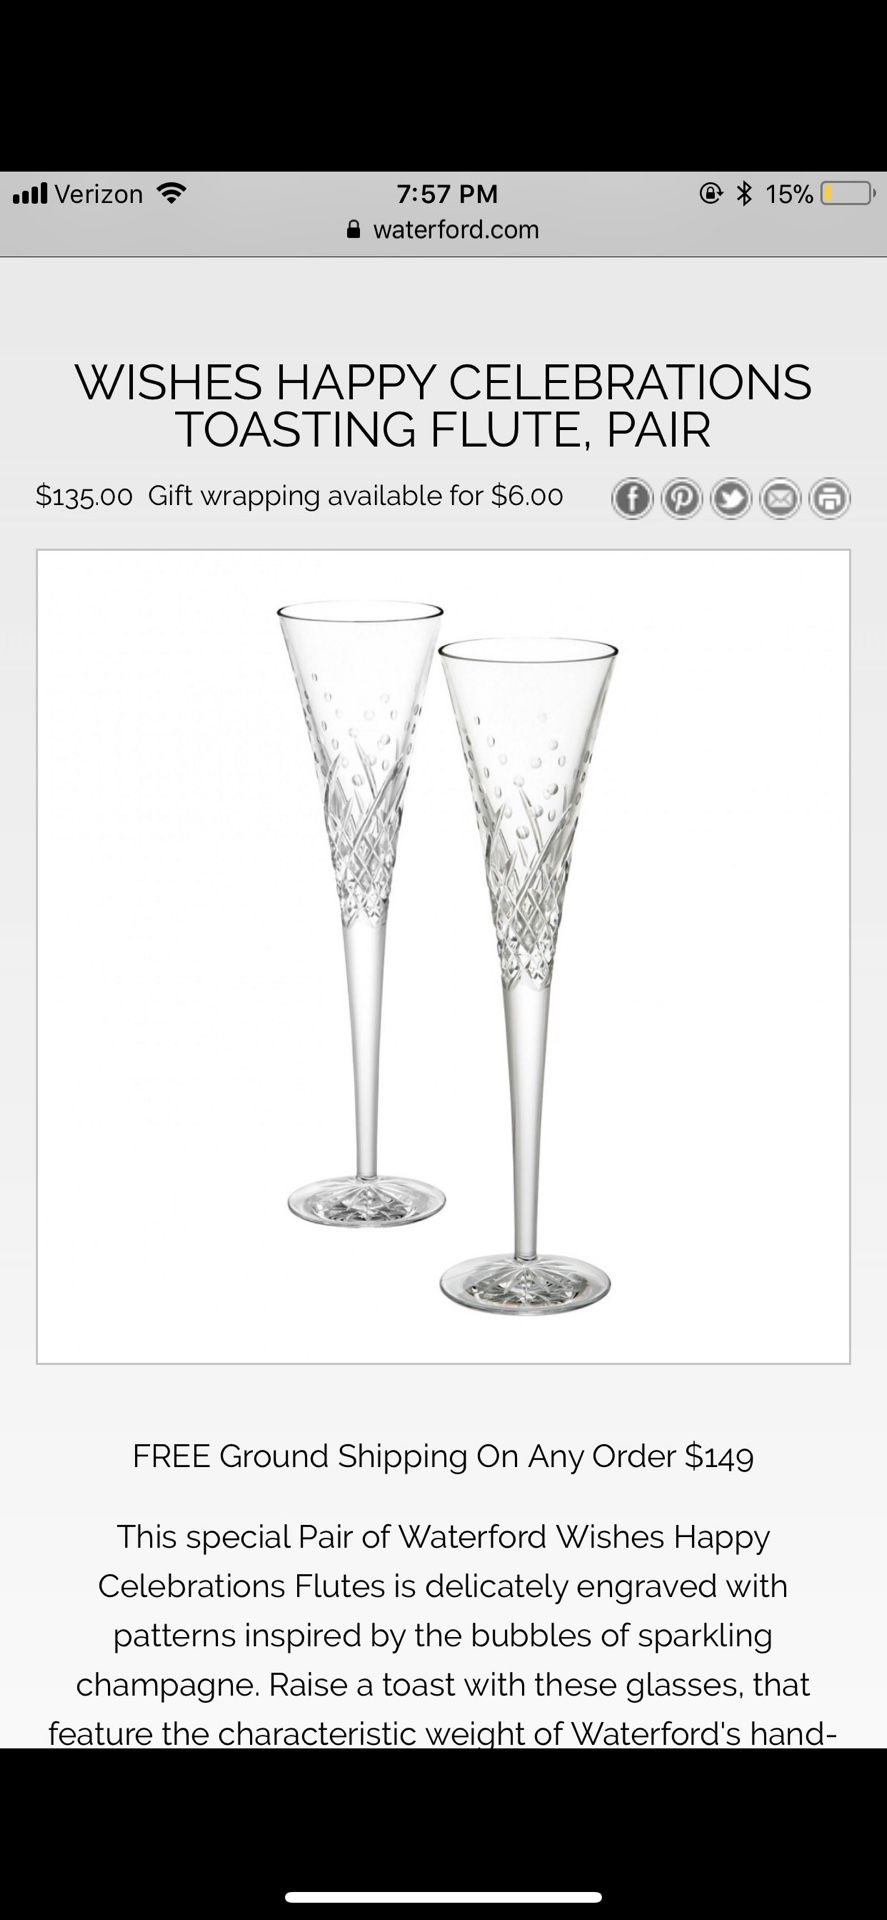 Brand NEW Wishes Toasting Happy Celebrations Flute, Pair. Perfect for a Wedding Gift! Selling online for $135!